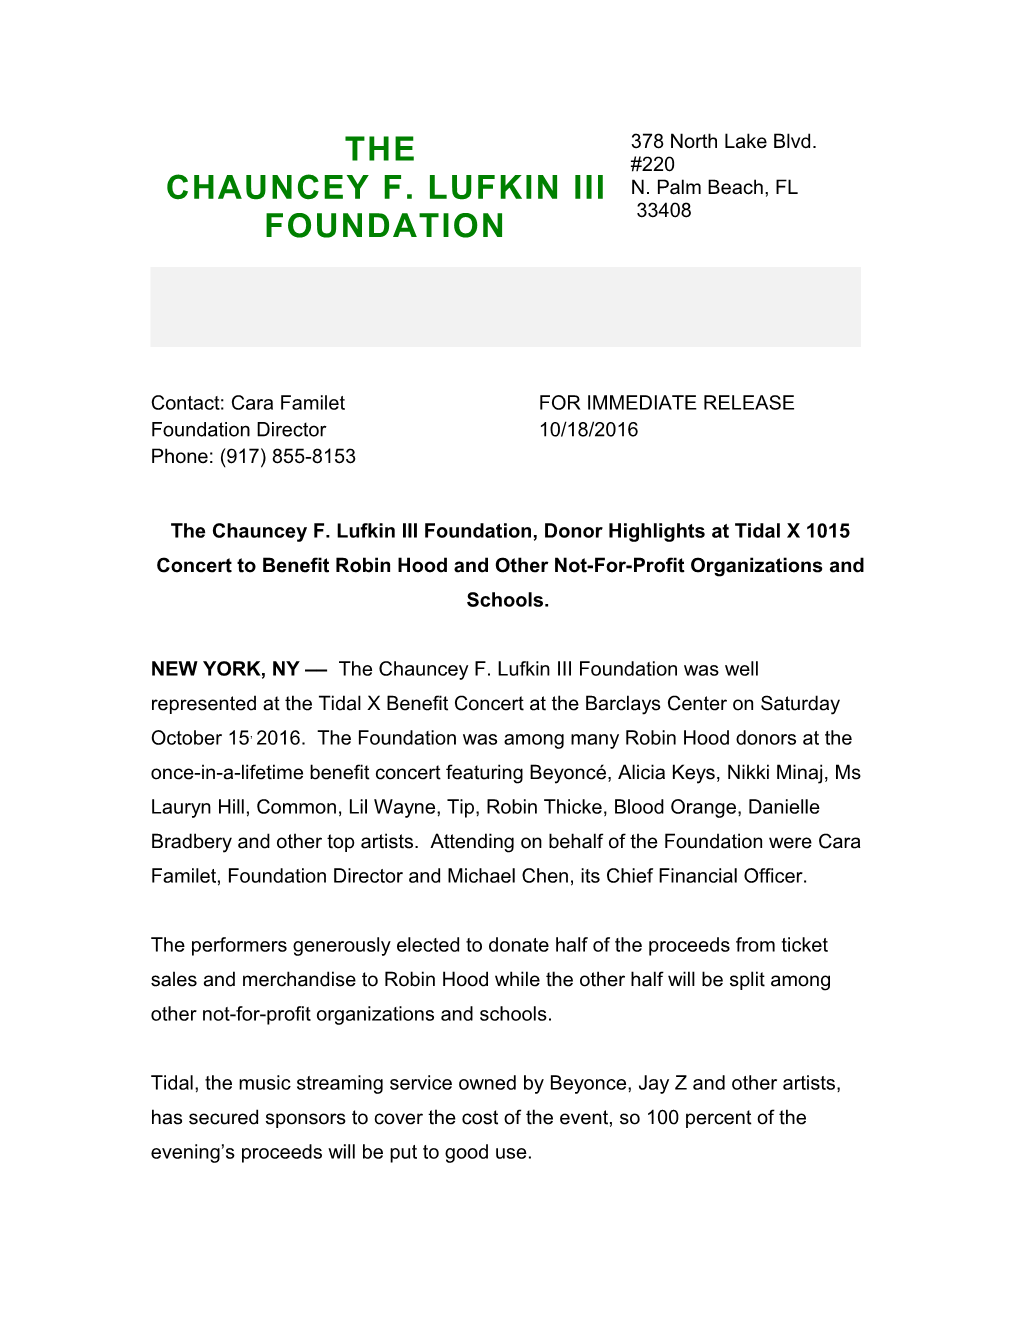 The Chauncey F. Lufkin III Foundation, Donor Highlights at Tidal X 1015 Concert to Benefit